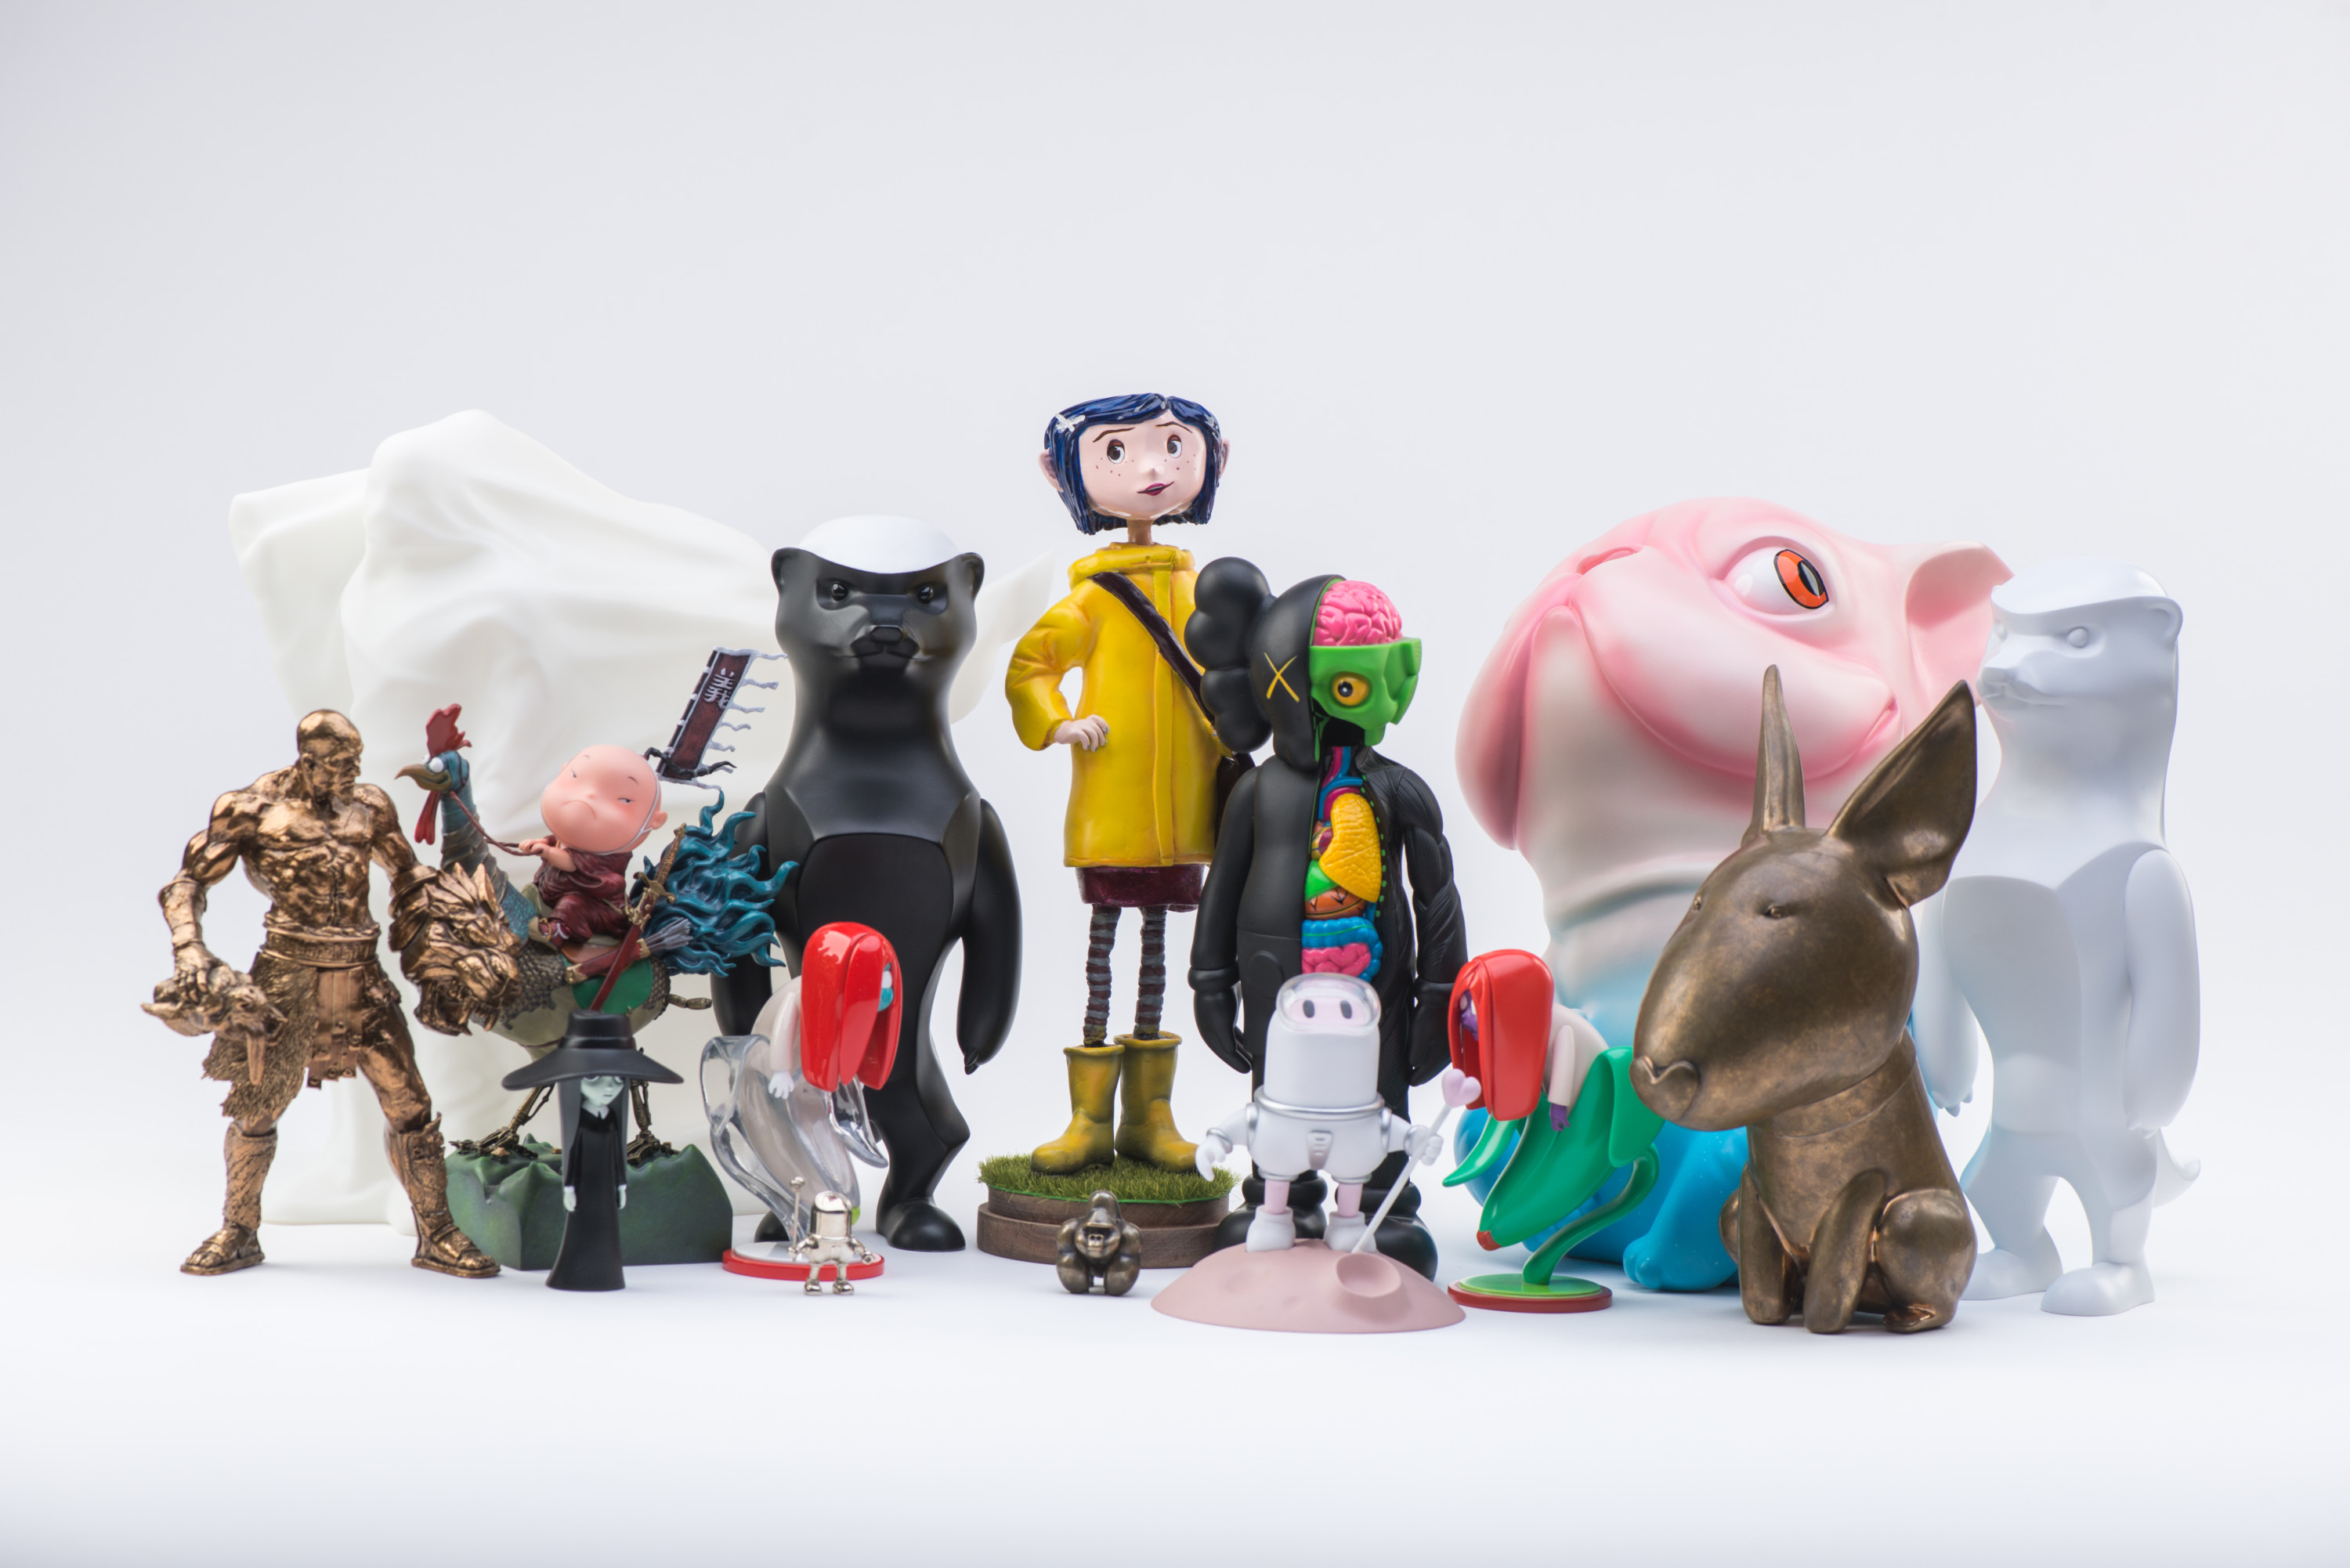 Mini Maker Series – Decorate your own Collector Figure